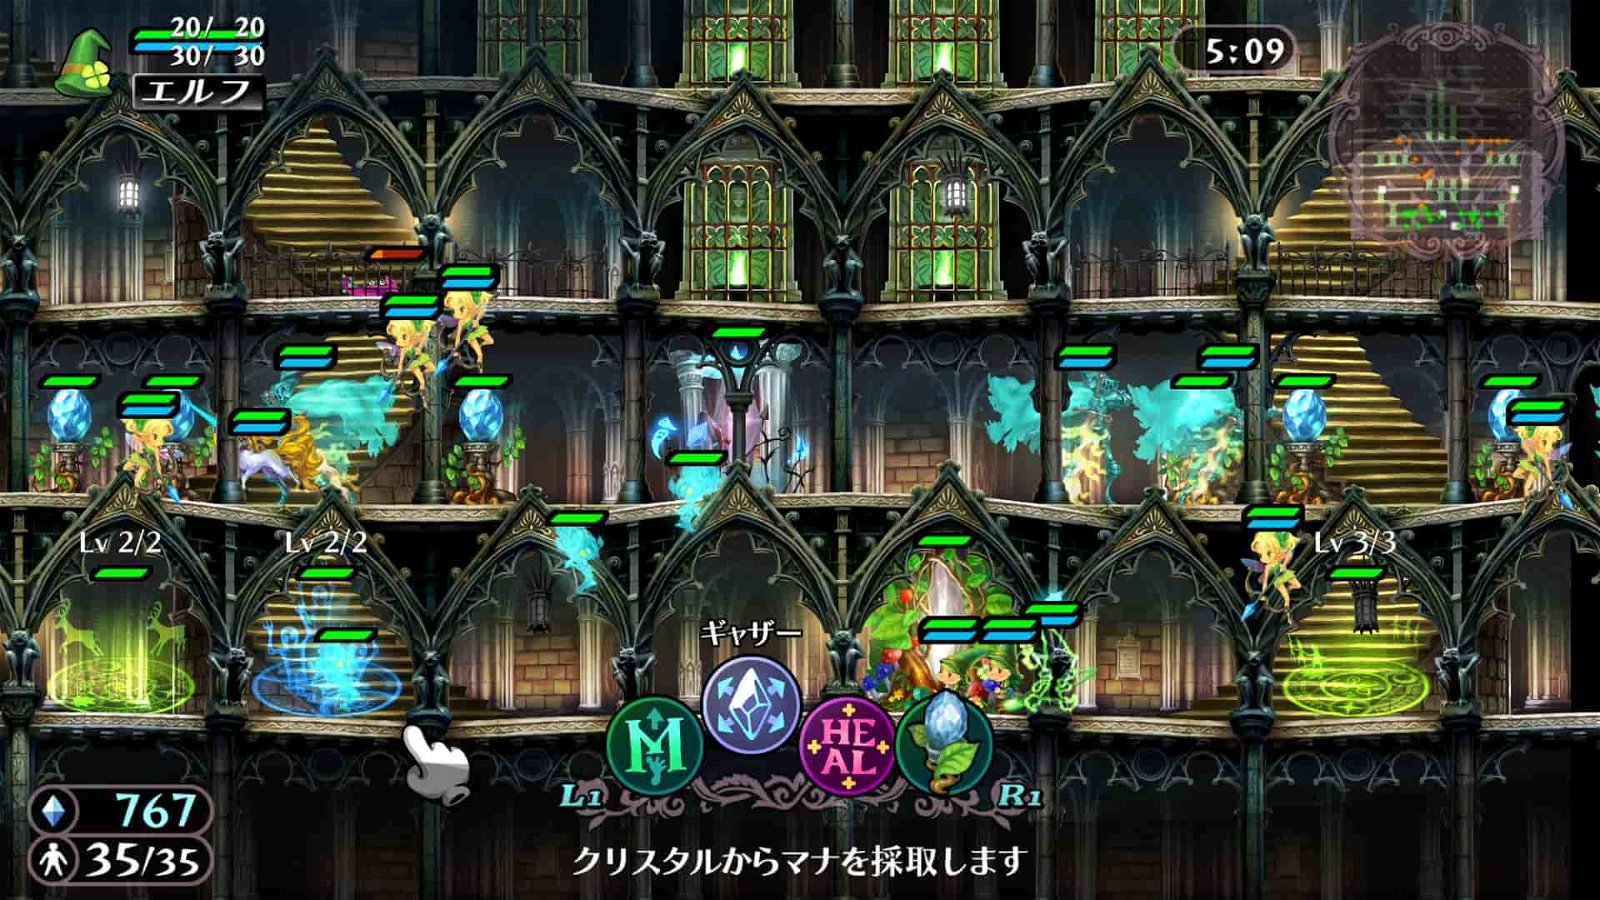 GrimGrimoire OnceMore, PlayStation 4, Nintendo Switch, Switch, PS4, Nippon Ichi Software, Nippon Ichi, Japan, gameplay, features, release date, price, trailer, screenshots